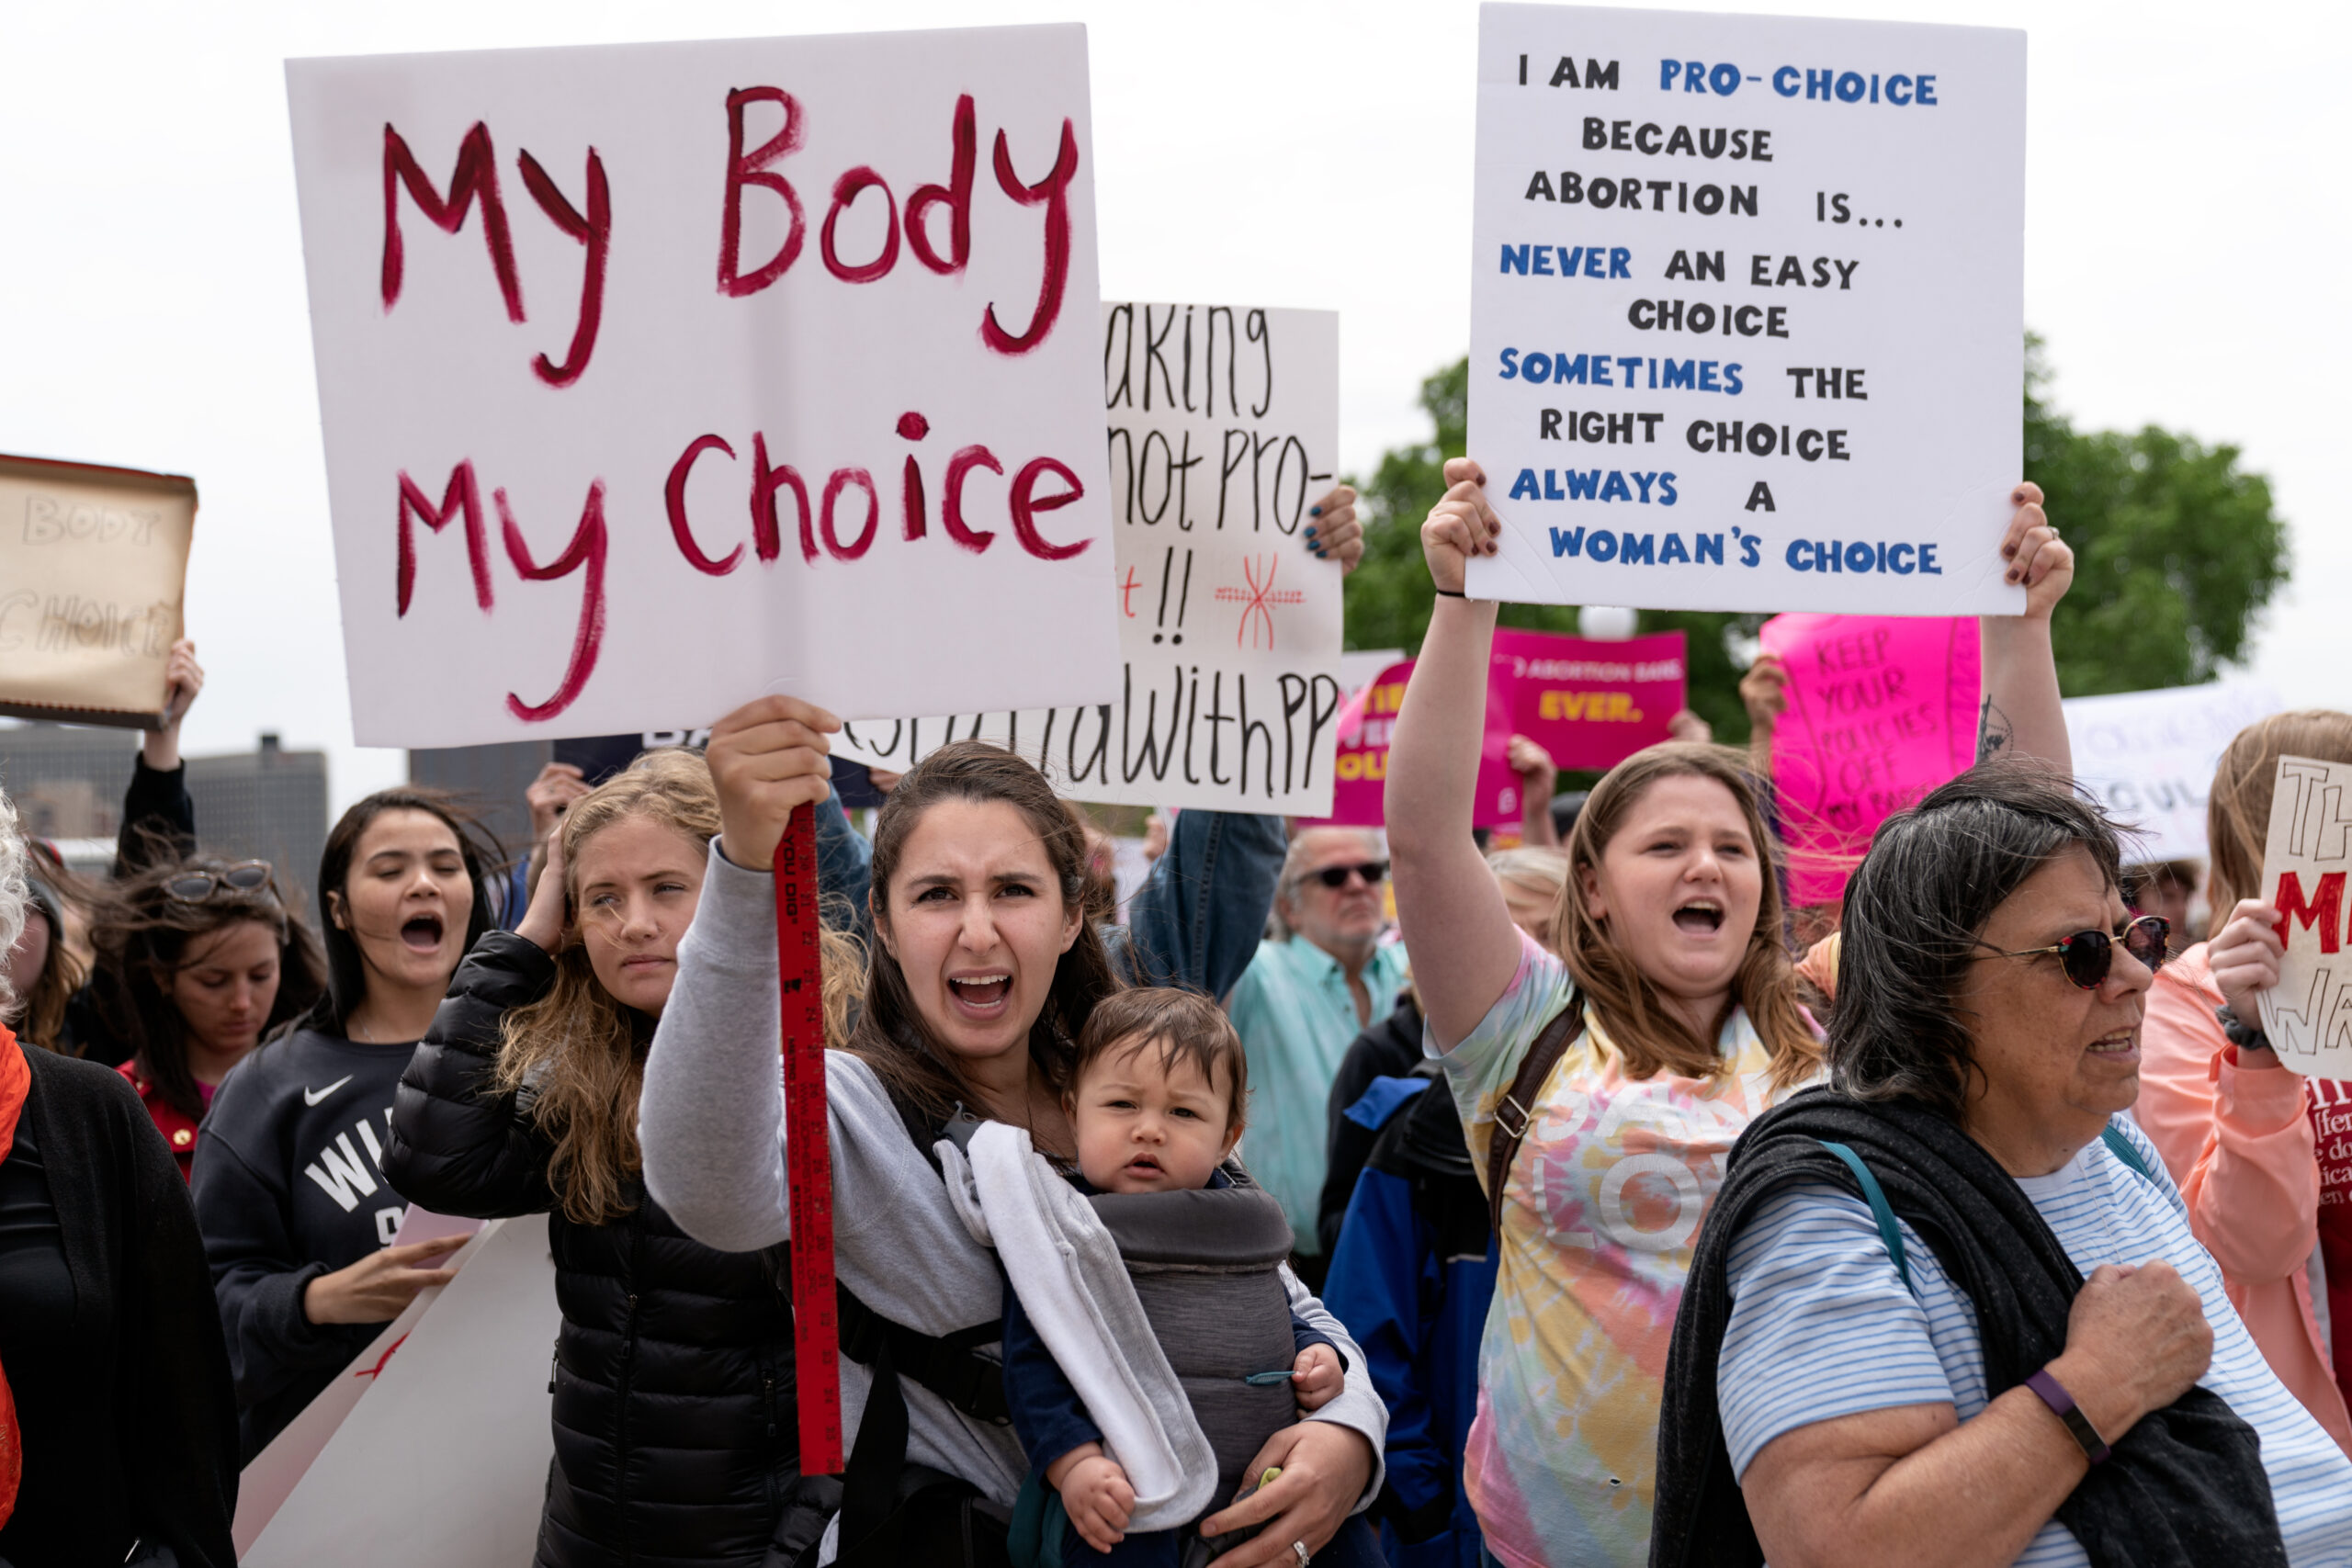 My body my choice: Time to recognise this right all over the world